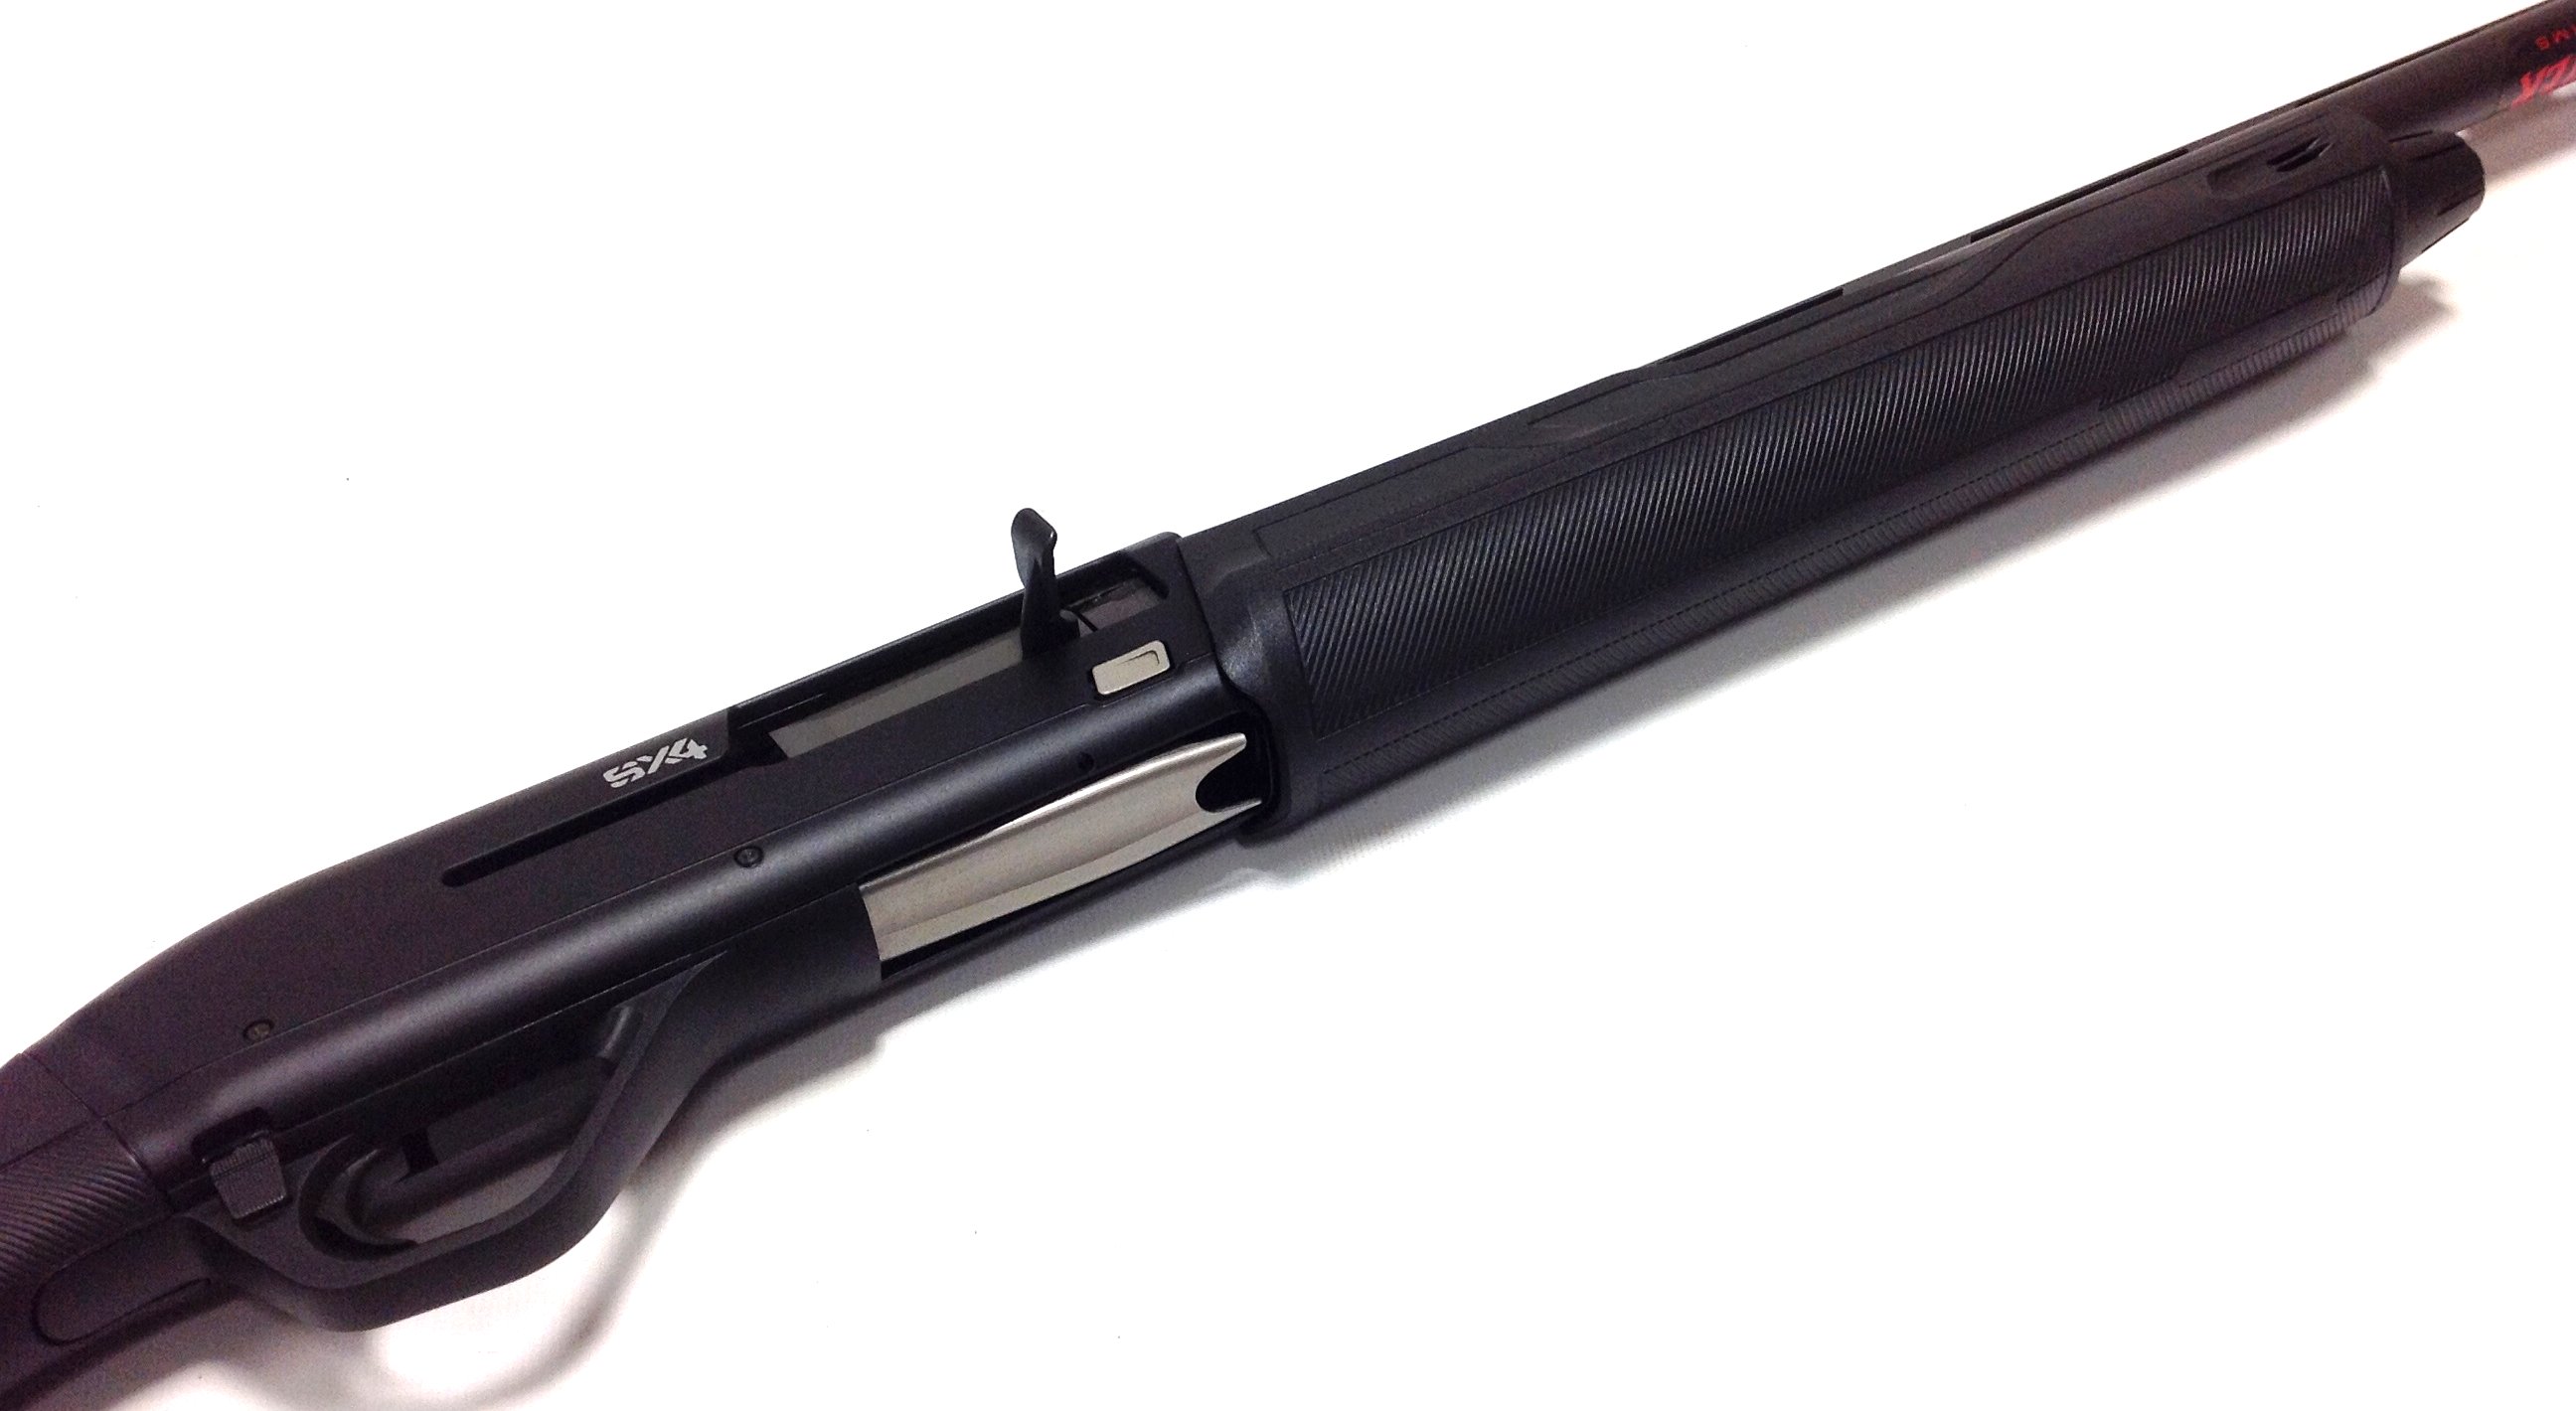 Winchester SX4 composite shotgun with 3.5" Chamber